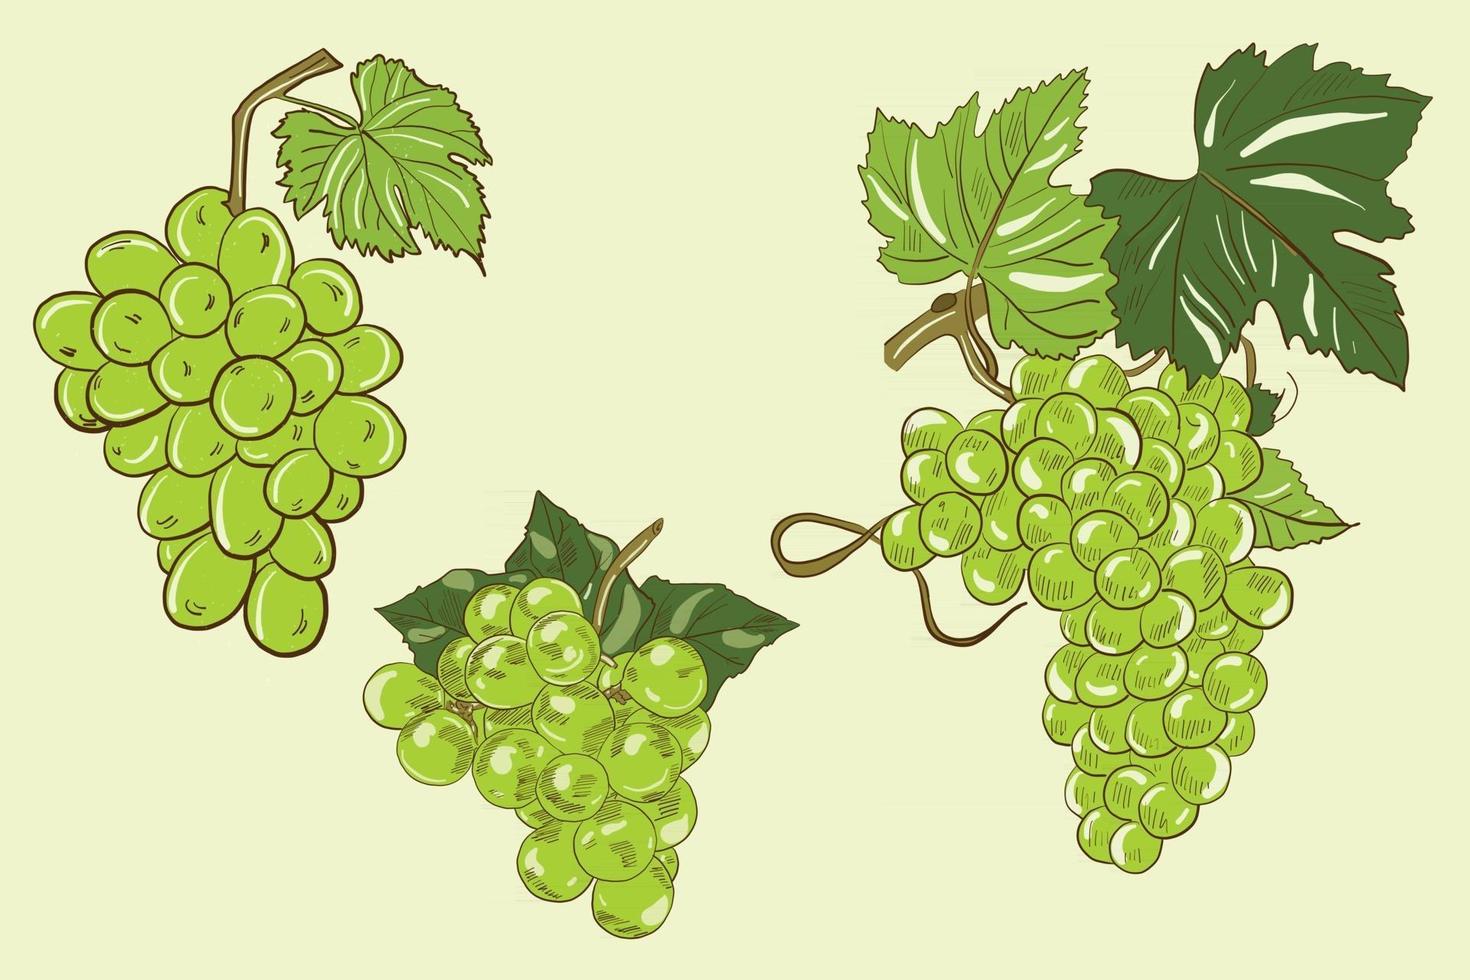 Vector illustration of green bunches of grapes with leaves